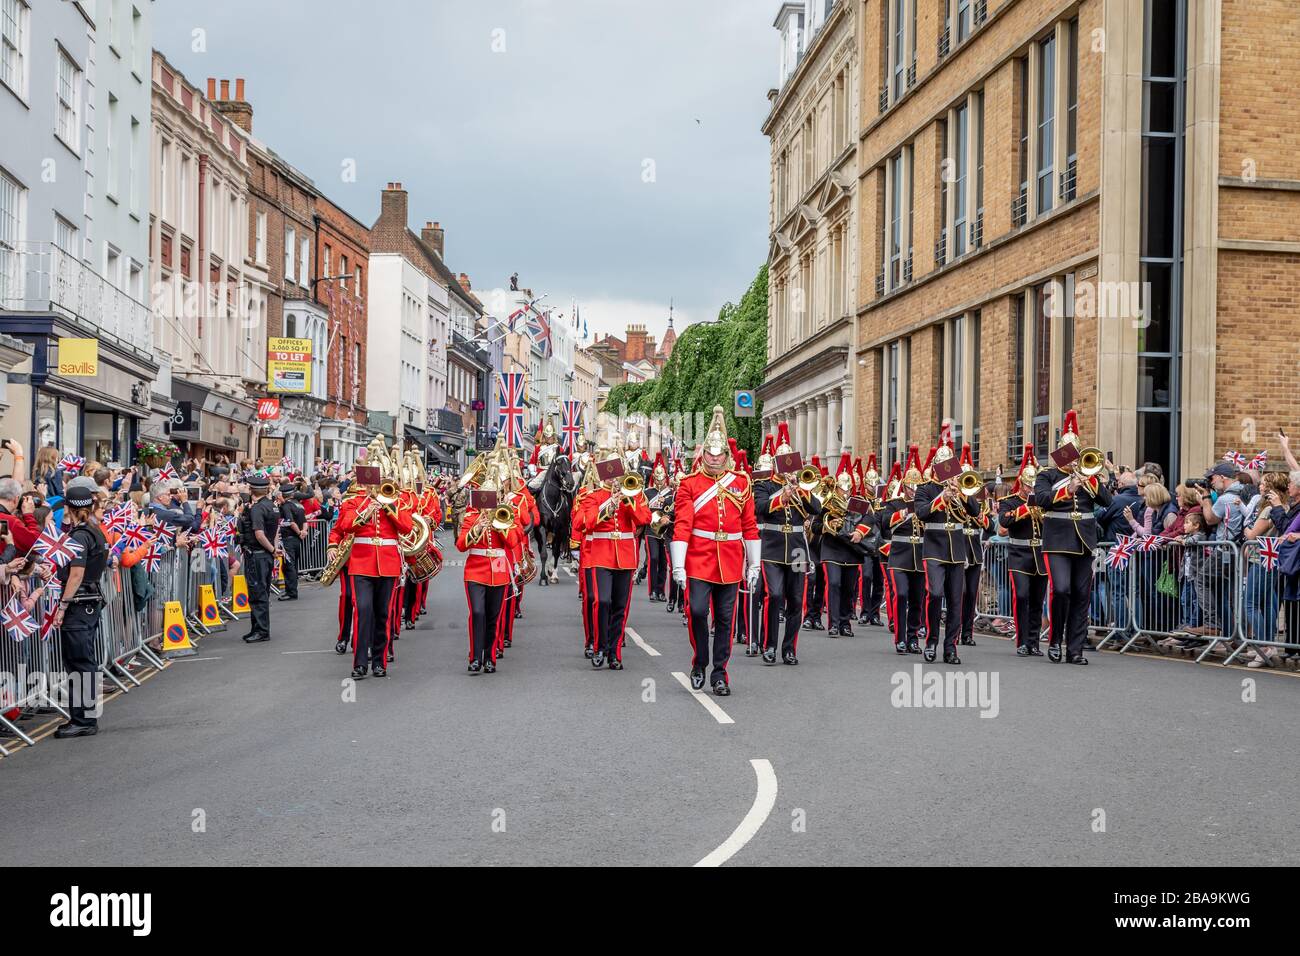 Band of the Household Cavalry leads the Household Cavalry farewell to Windsor parade through Windosr, Berkshire, UK - May 18th 2019 Stock Photo